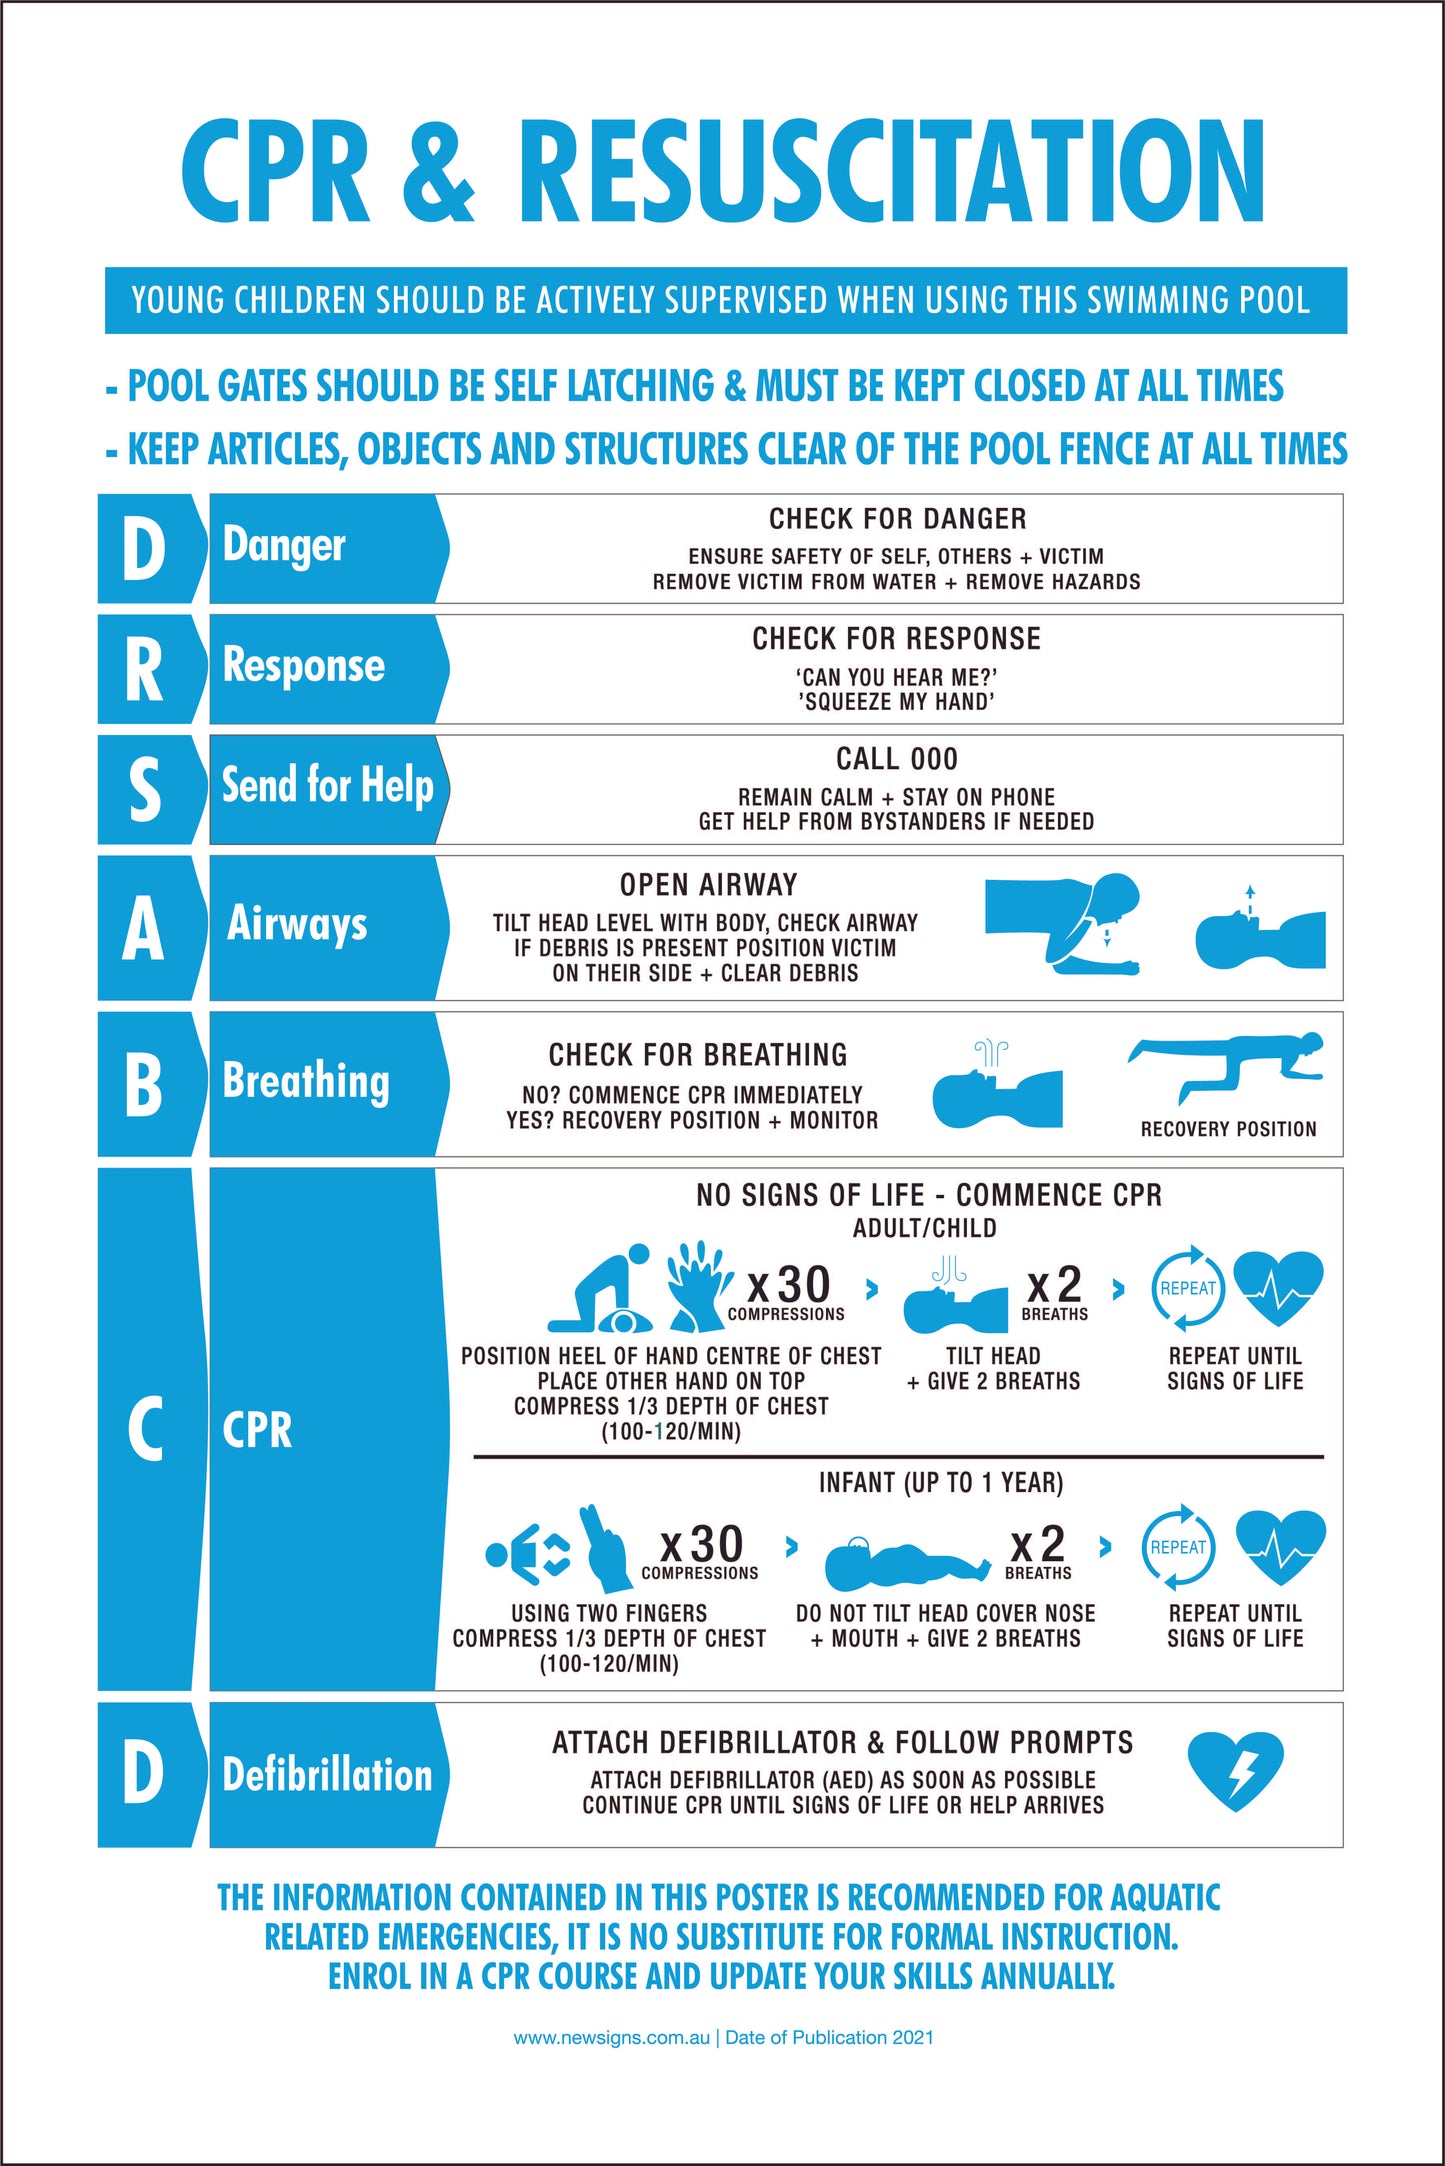 CPR Resuscitation Guide 5 Sign